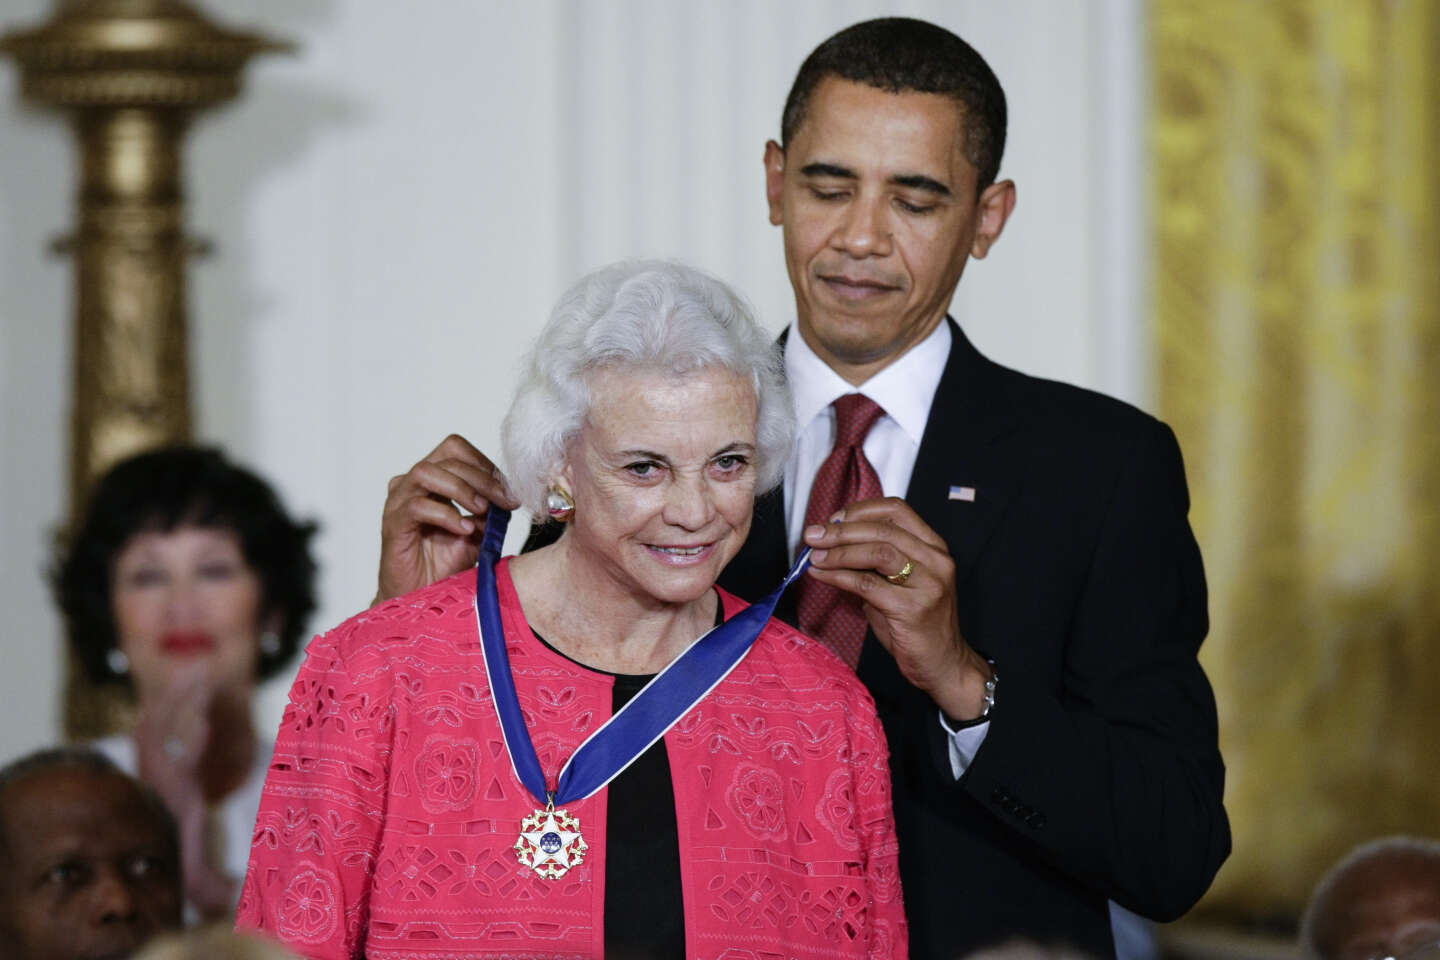 Sandra Day O’Connor, the first woman to serve on the US Supreme Court, has died